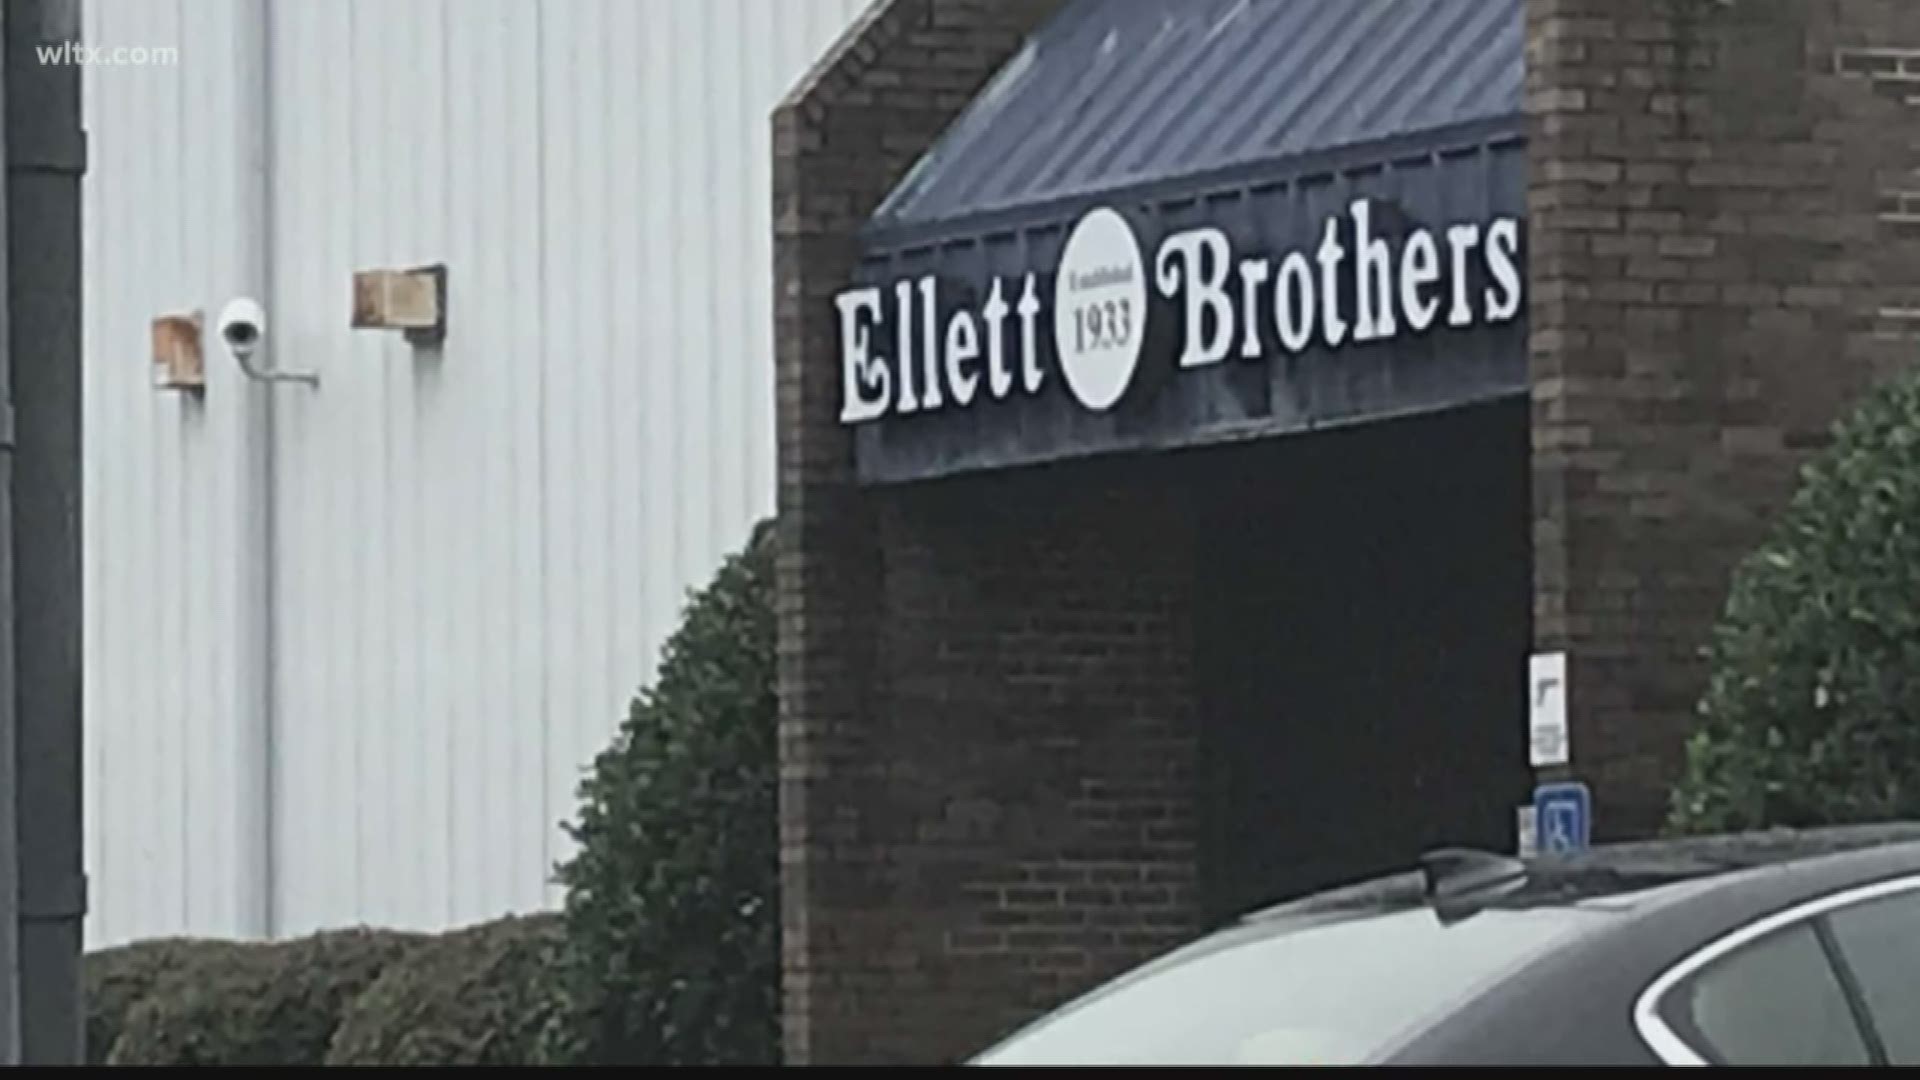 Ellett Brothers in Chapin is closing and over 170 people will lose their jobs.